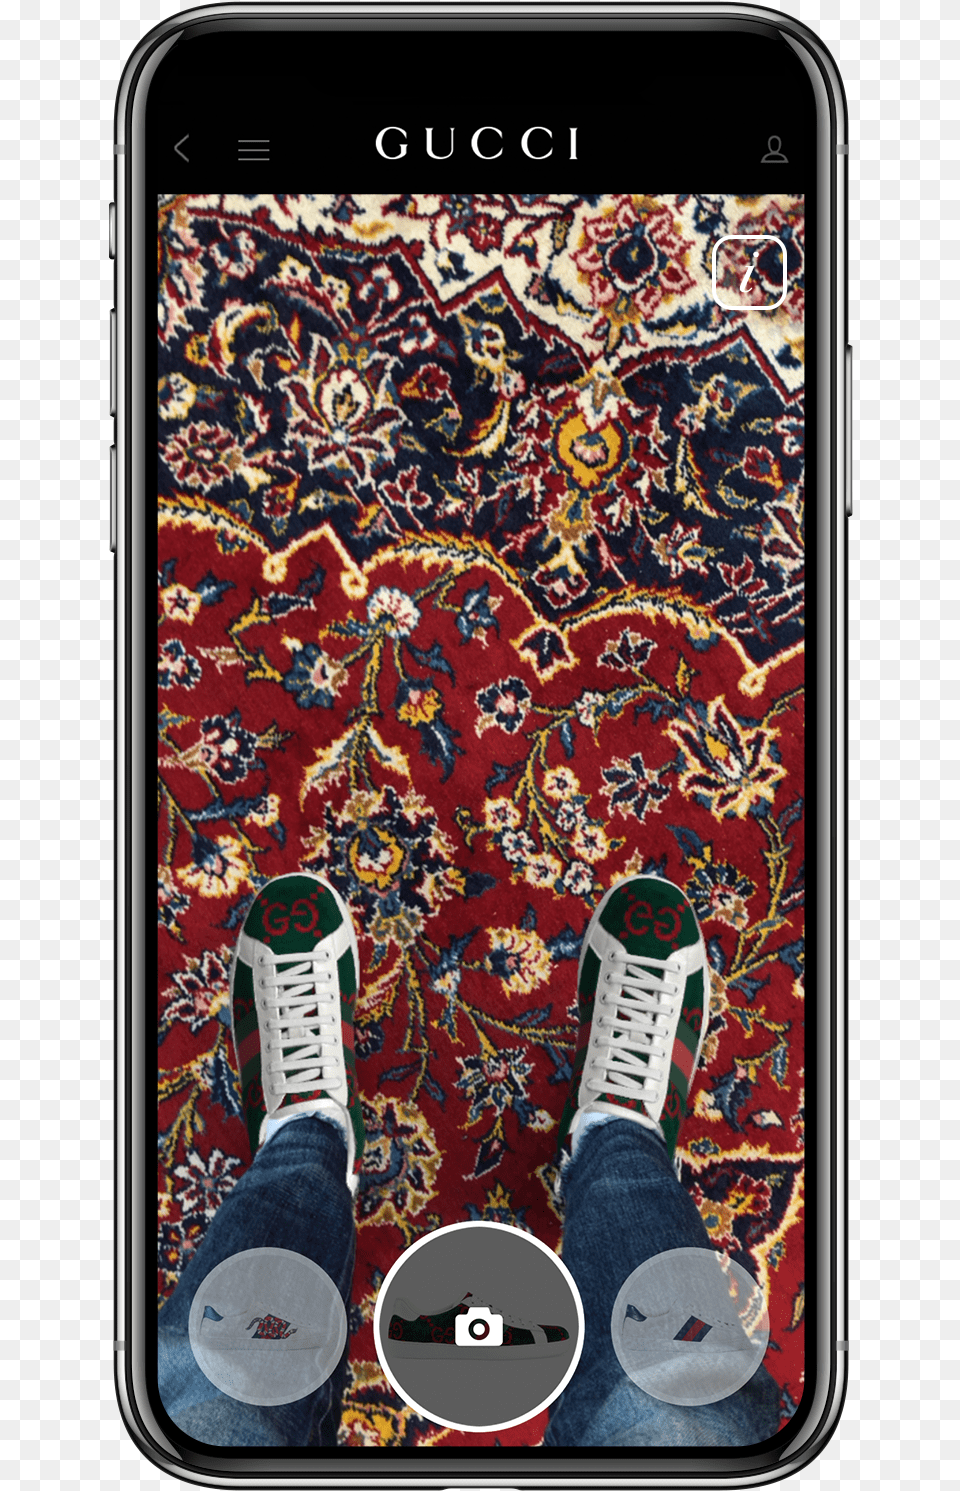 Gucci Ace Sneaker Try On App Result, Shoe, Rug, Clothing, Footwear Png Image